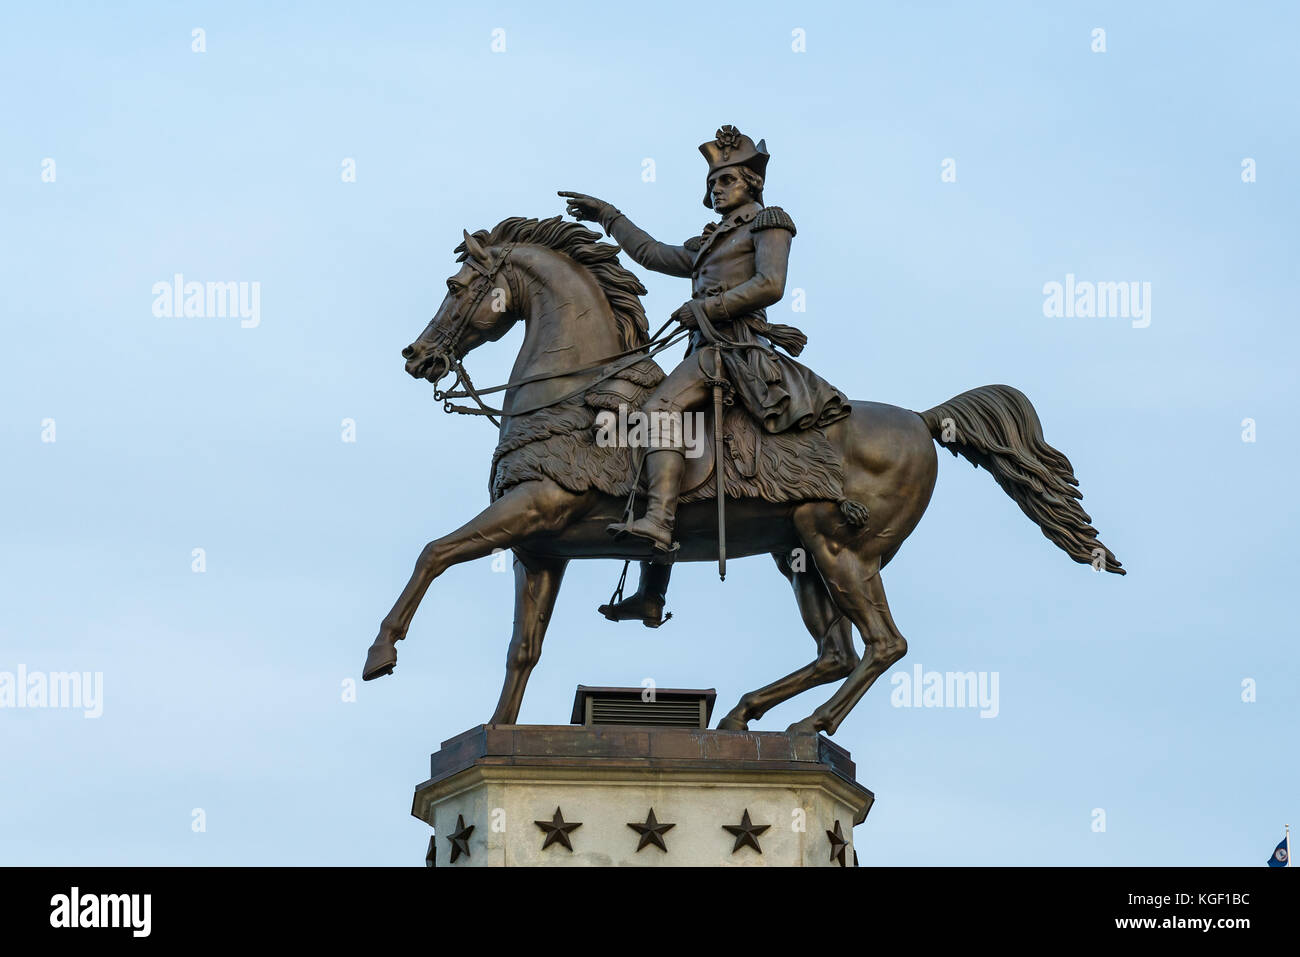 RICHMOND, VIRGINIA - MARCH 25: George Washington Monument on Capitol Square at the Virginia State Capitol on March 25, 2017 in Richmond, Virginia Stock Photo